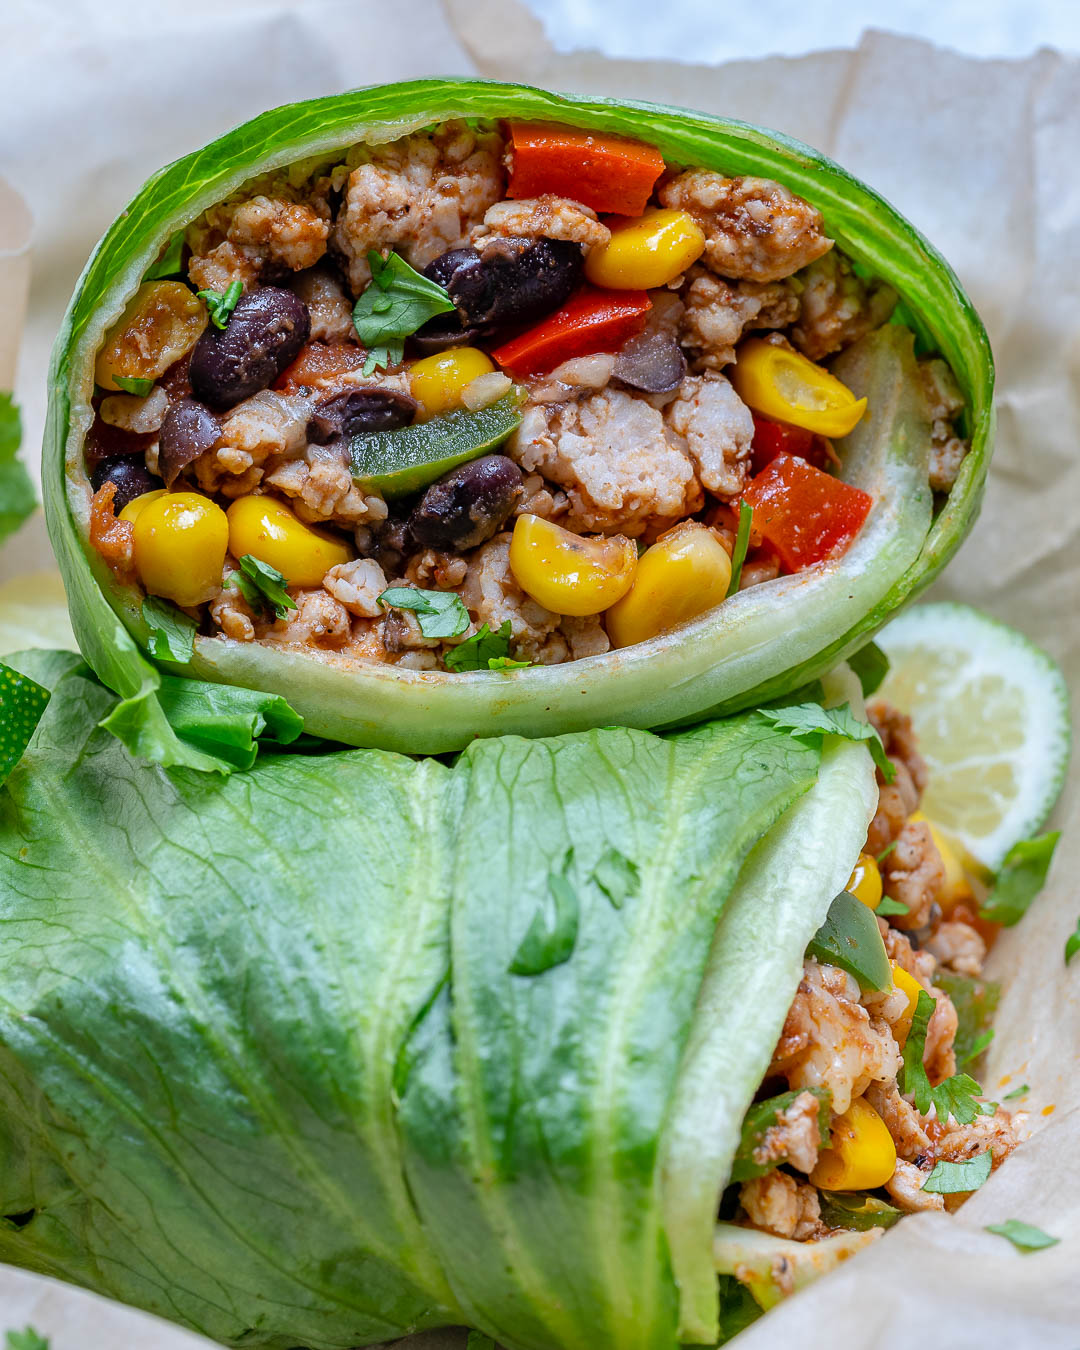 Healthy Lettuce Wrapped Burritos Ingredients